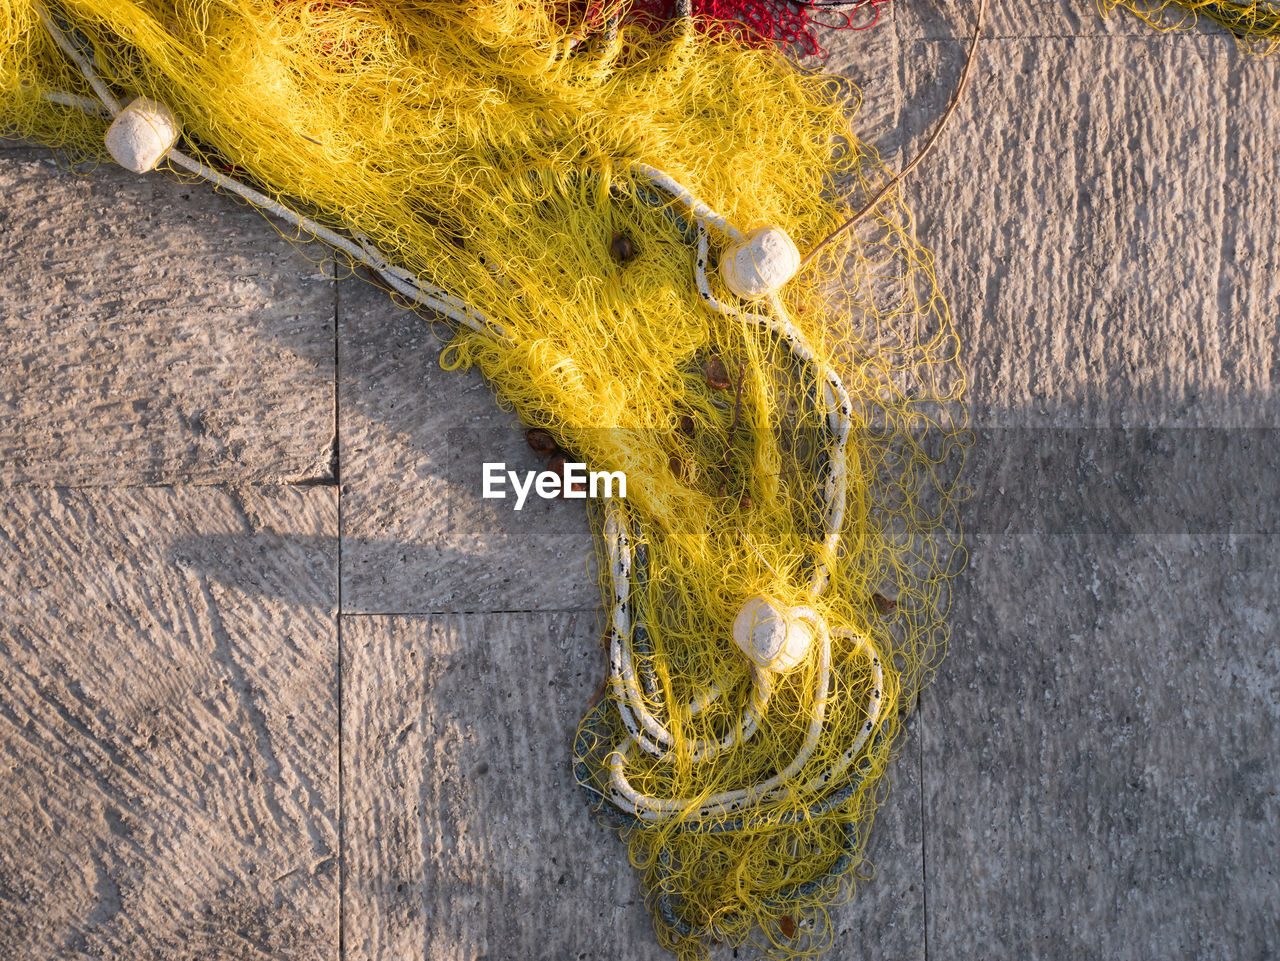 High angle view of fishing net on road